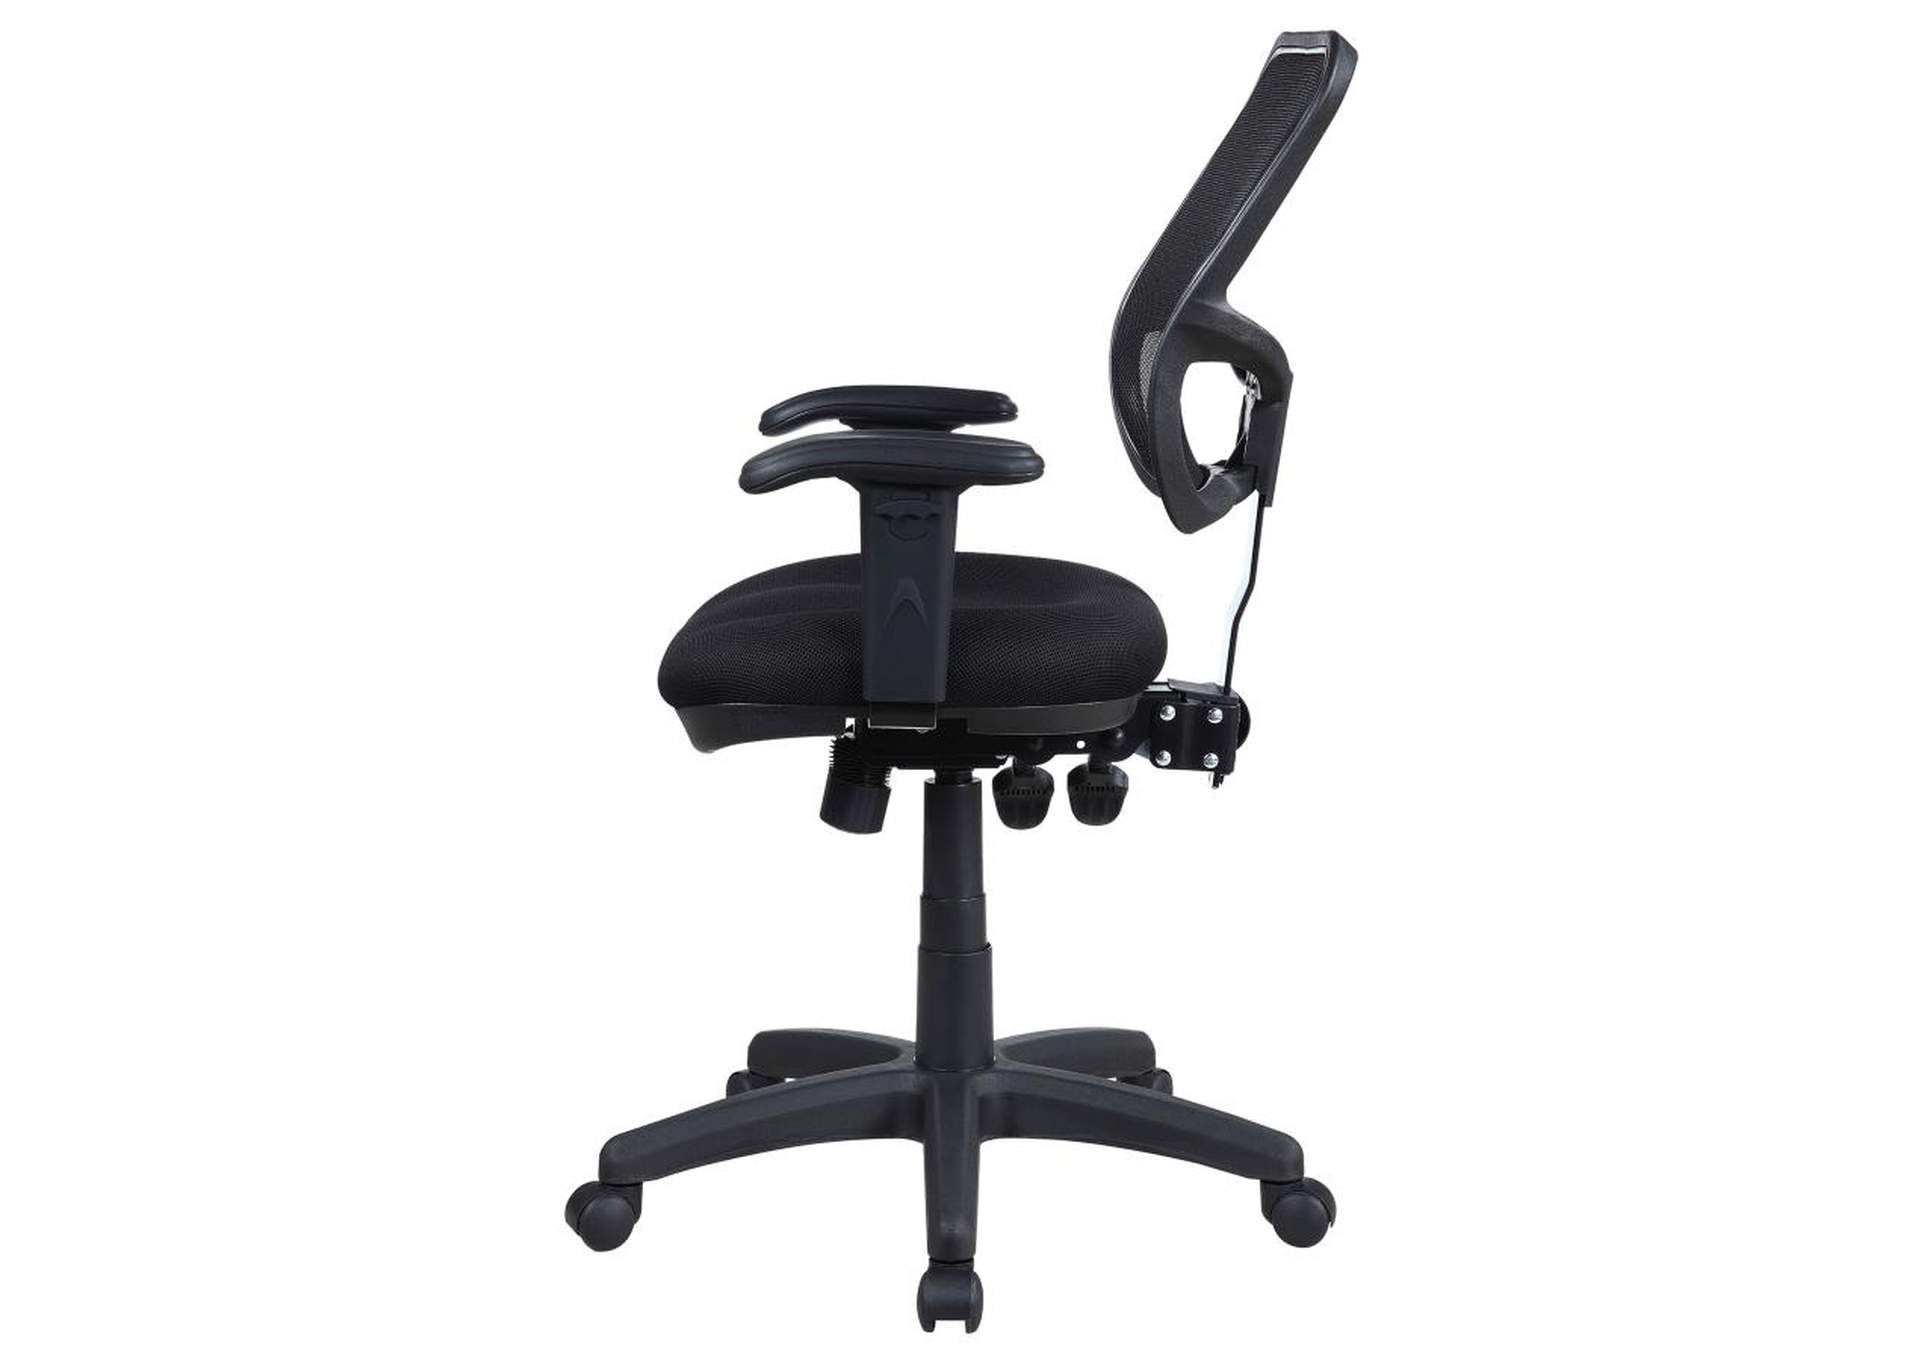 Adjustable Height Office Chair Black,Coaster Furniture